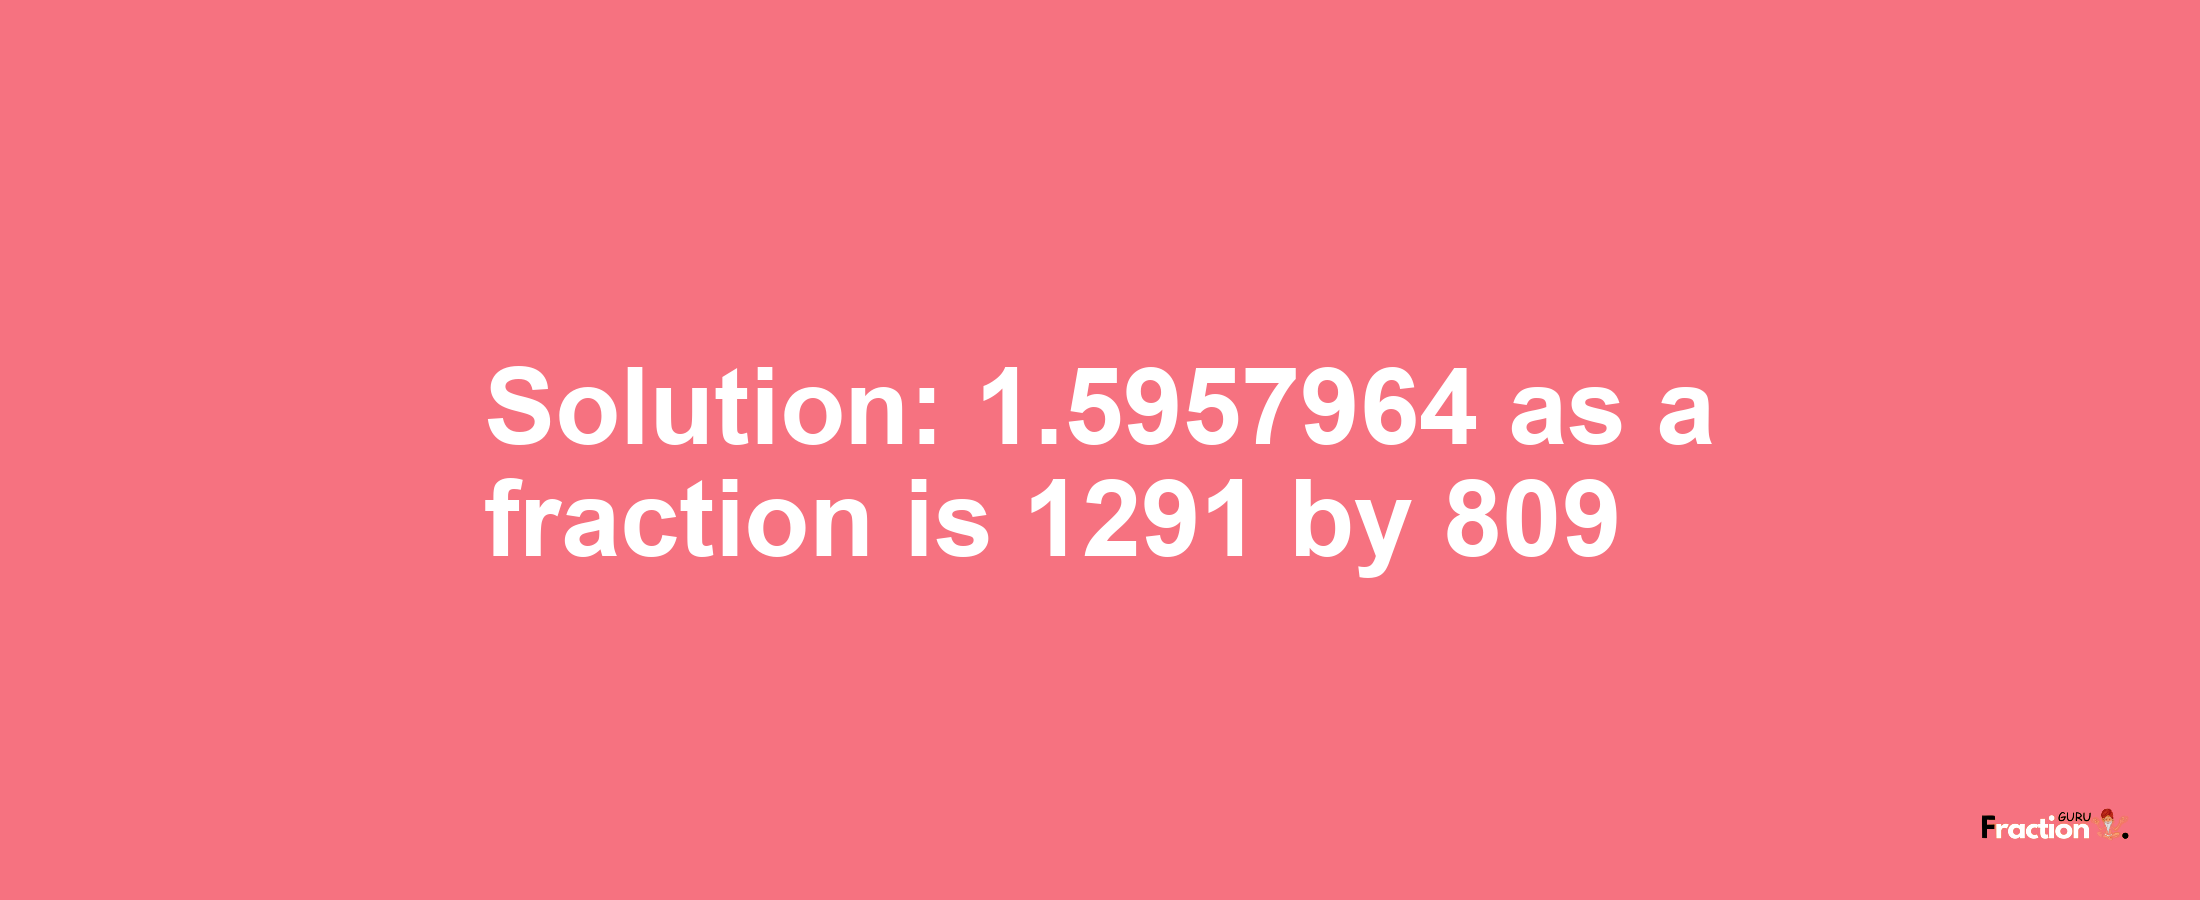 Solution:1.5957964 as a fraction is 1291/809